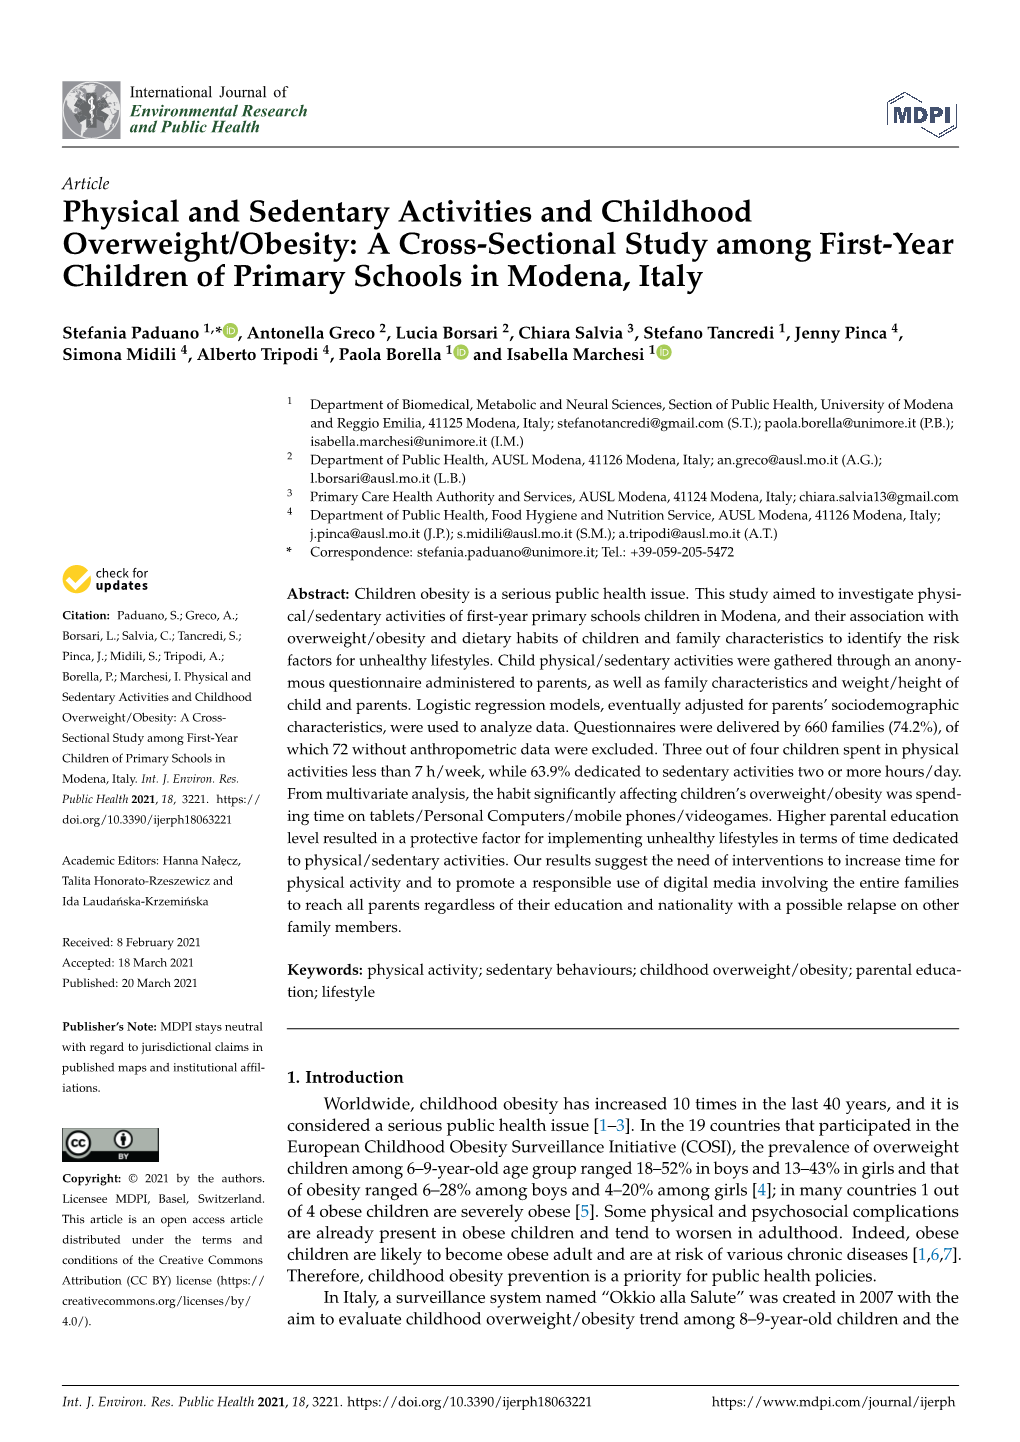 Physical and Sedentary Activities and Childhood Overweight/Obesity: a Cross-Sectional Study Among First-Year Children of Primary Schools in Modena, Italy